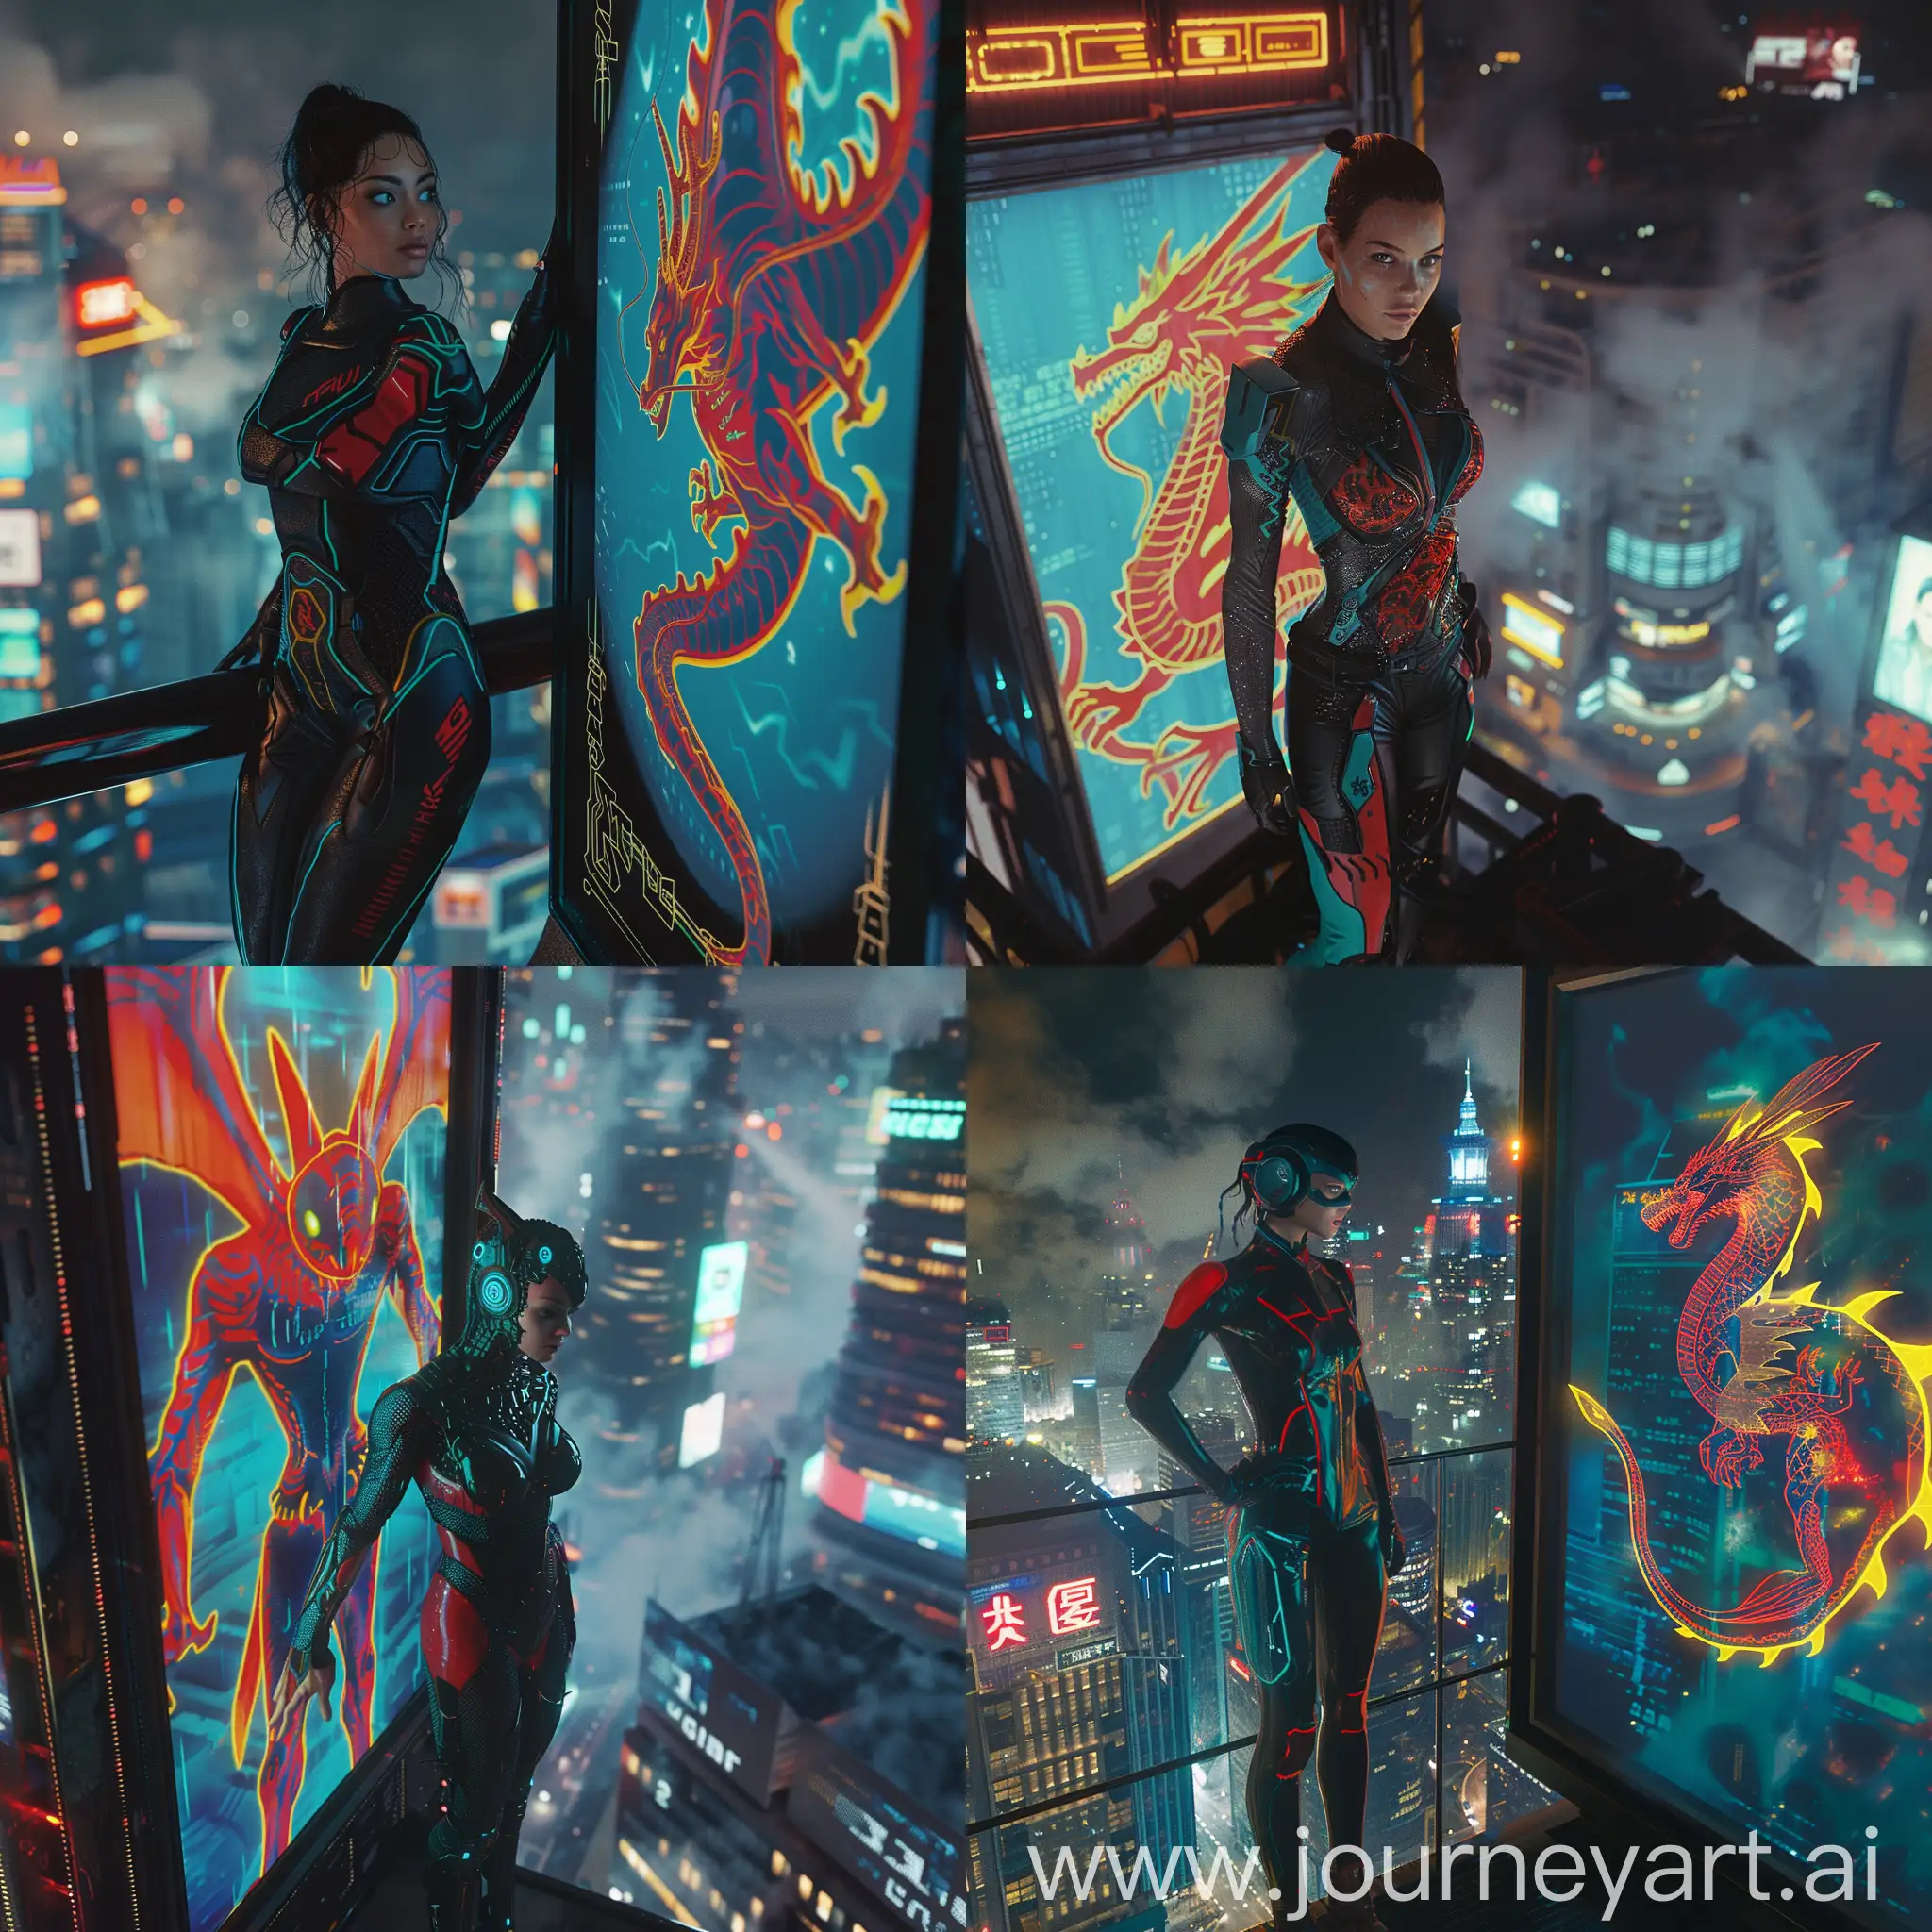 close up photo portrait of a slender pretty female futuristic vigilante in a black,red and teal high-tech suit, standing on a rooftop of a skyscraper at midnight overlooking a sprawling, in focus intricately detailed colourful neon lit futuristic style city . close up capturing the vigilante in center focused stood next to a futuristic designed billboard with a stunning advertisment image. steam. 35mm film The lighting is moody and atmospheric, with the moonlight casting long, eerie shadows.darkness, steam.huge 3D futuristic holographic display depicting a dragon in red blue with yellow outline